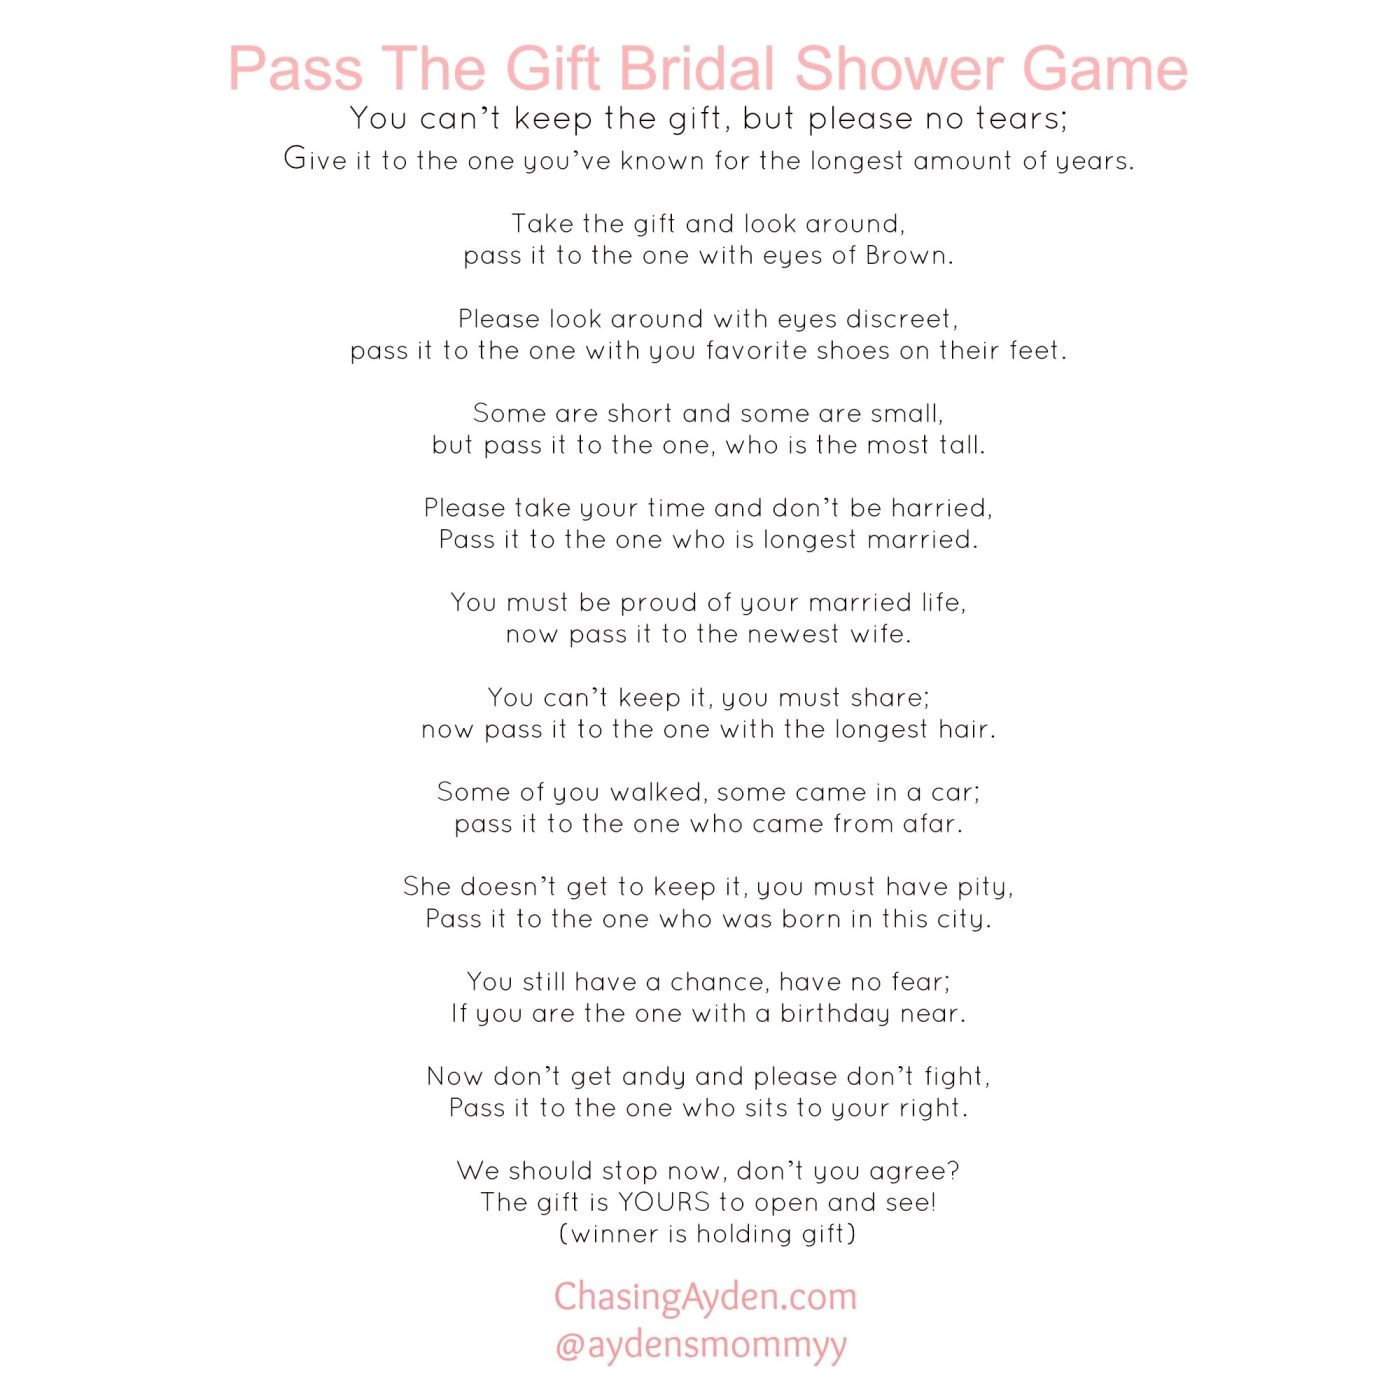 Gifts for Bridal Shower Games Bridal Shower Invitation Poems and Quotes Poem Gift Candles From